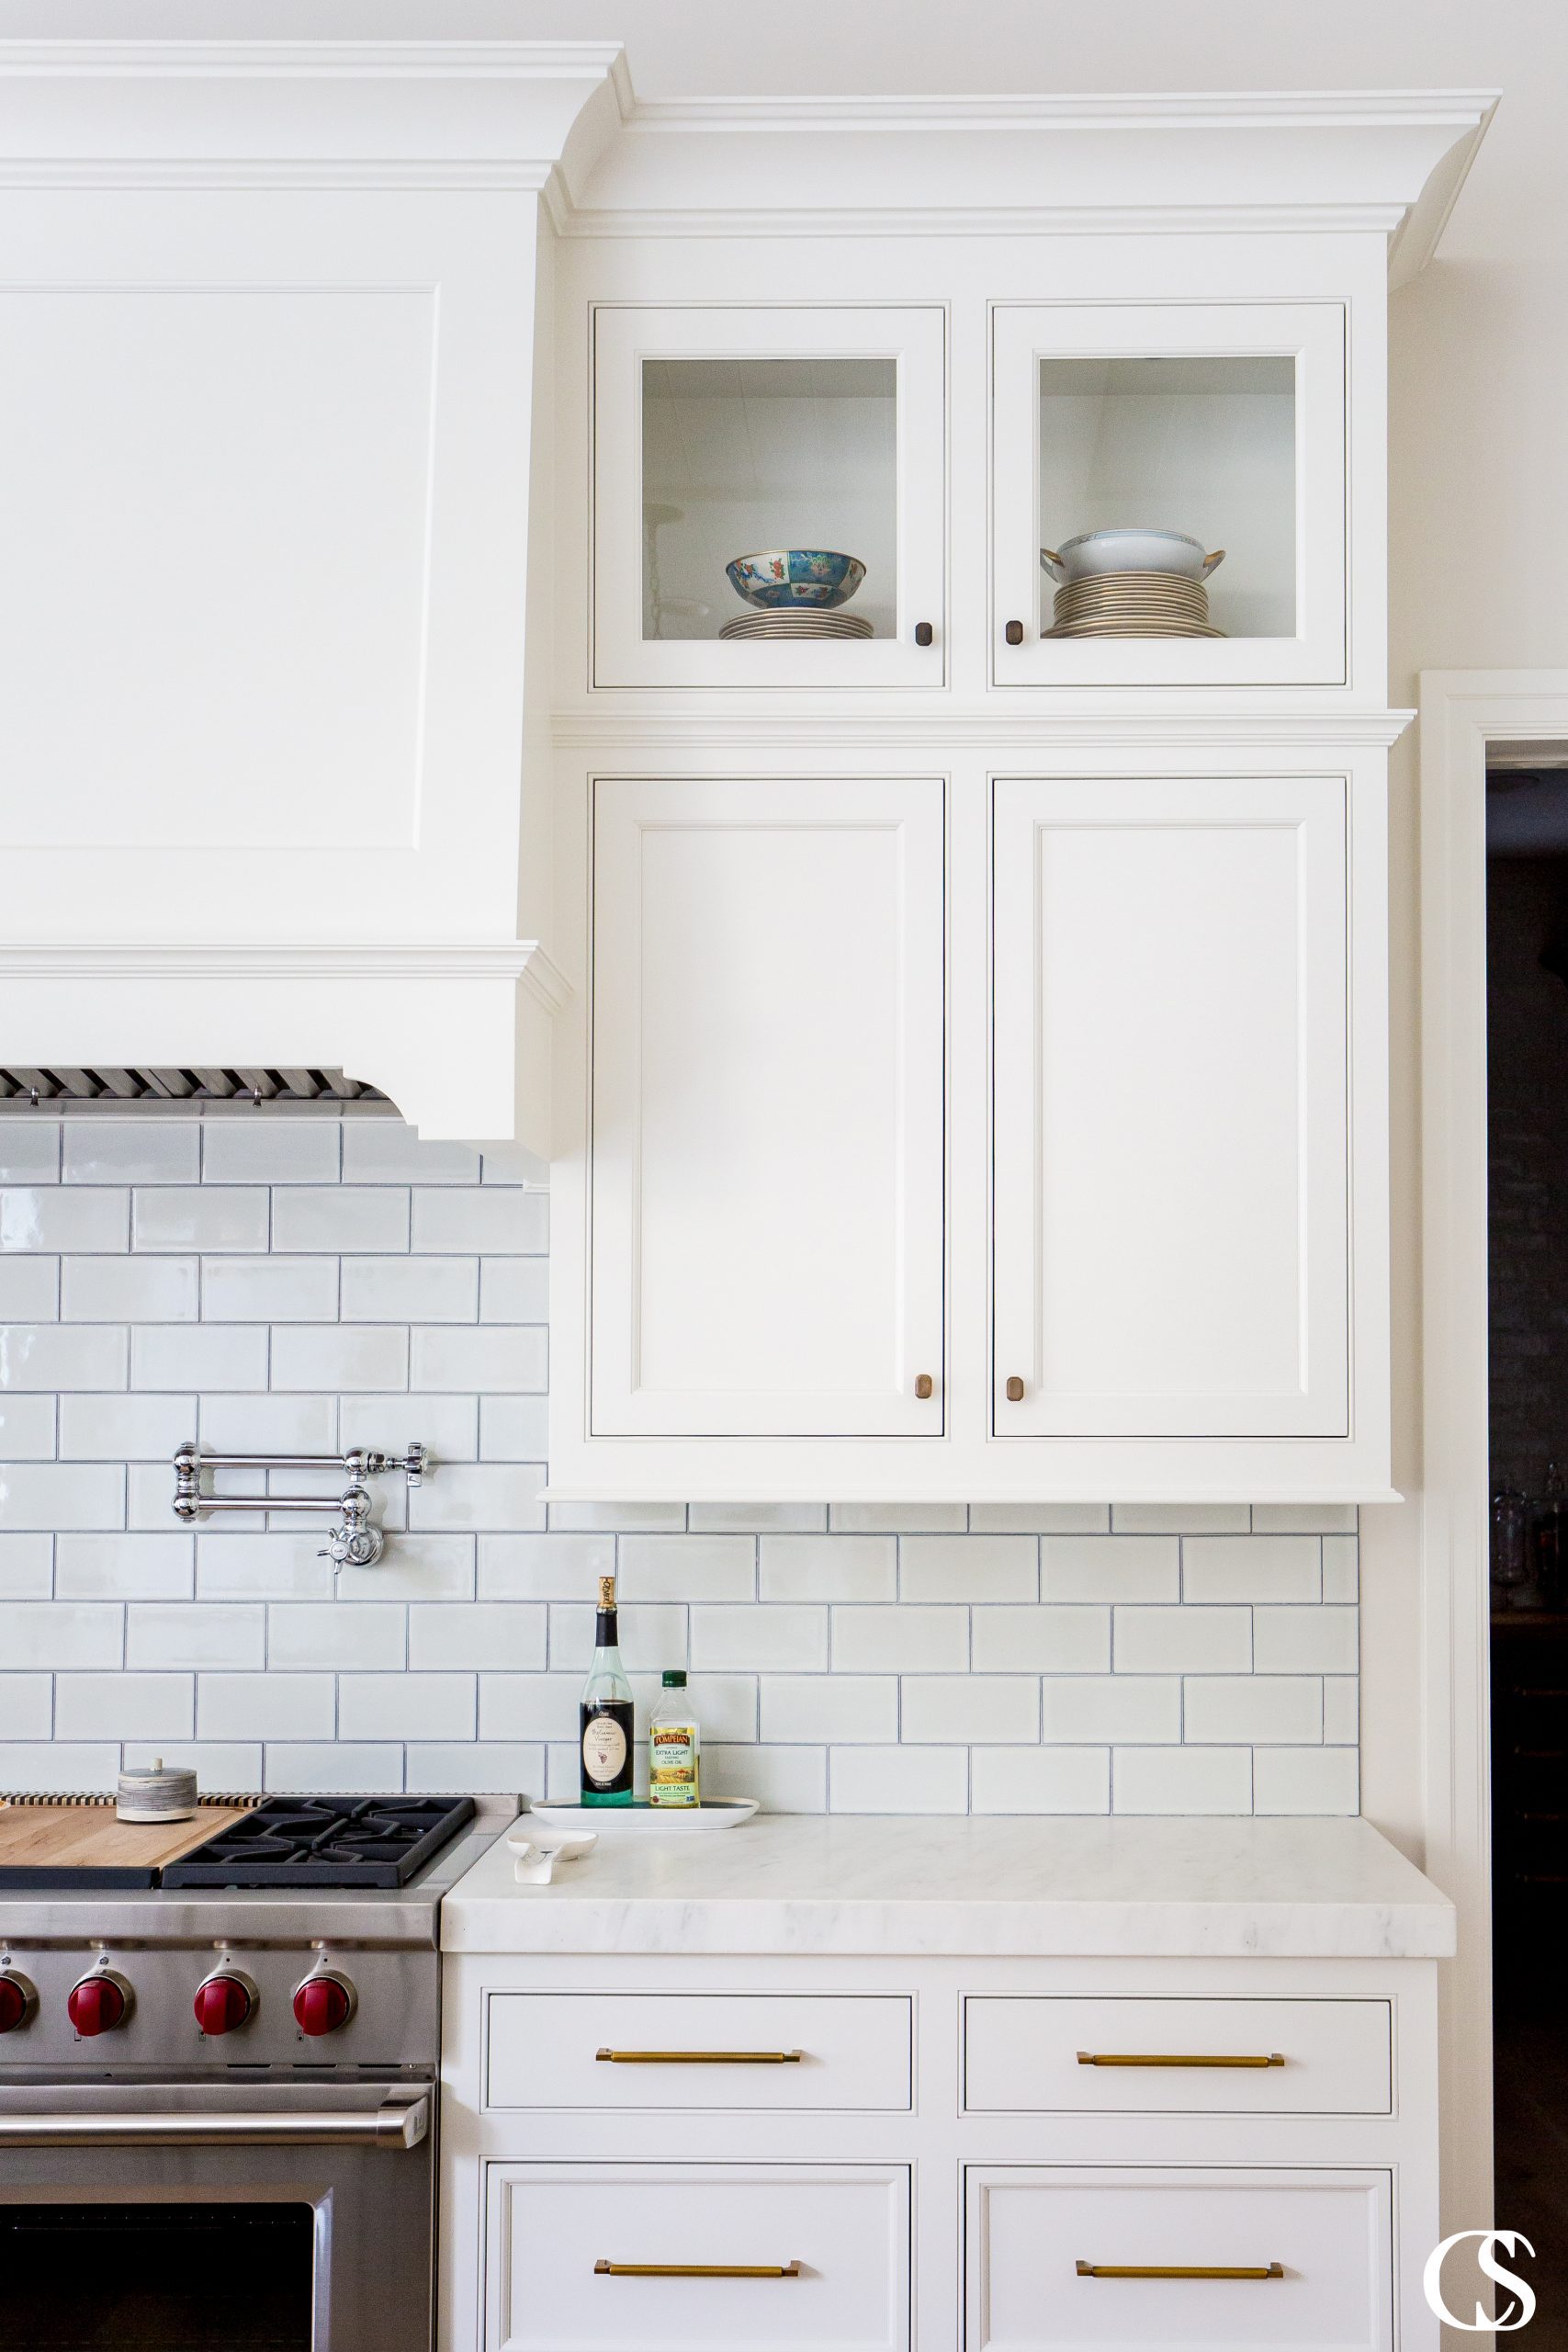 The cabinets for your kitchen should work hard but also provide a little joy—like being able to see your favorite dishes you bought abroad each time you enter the room.